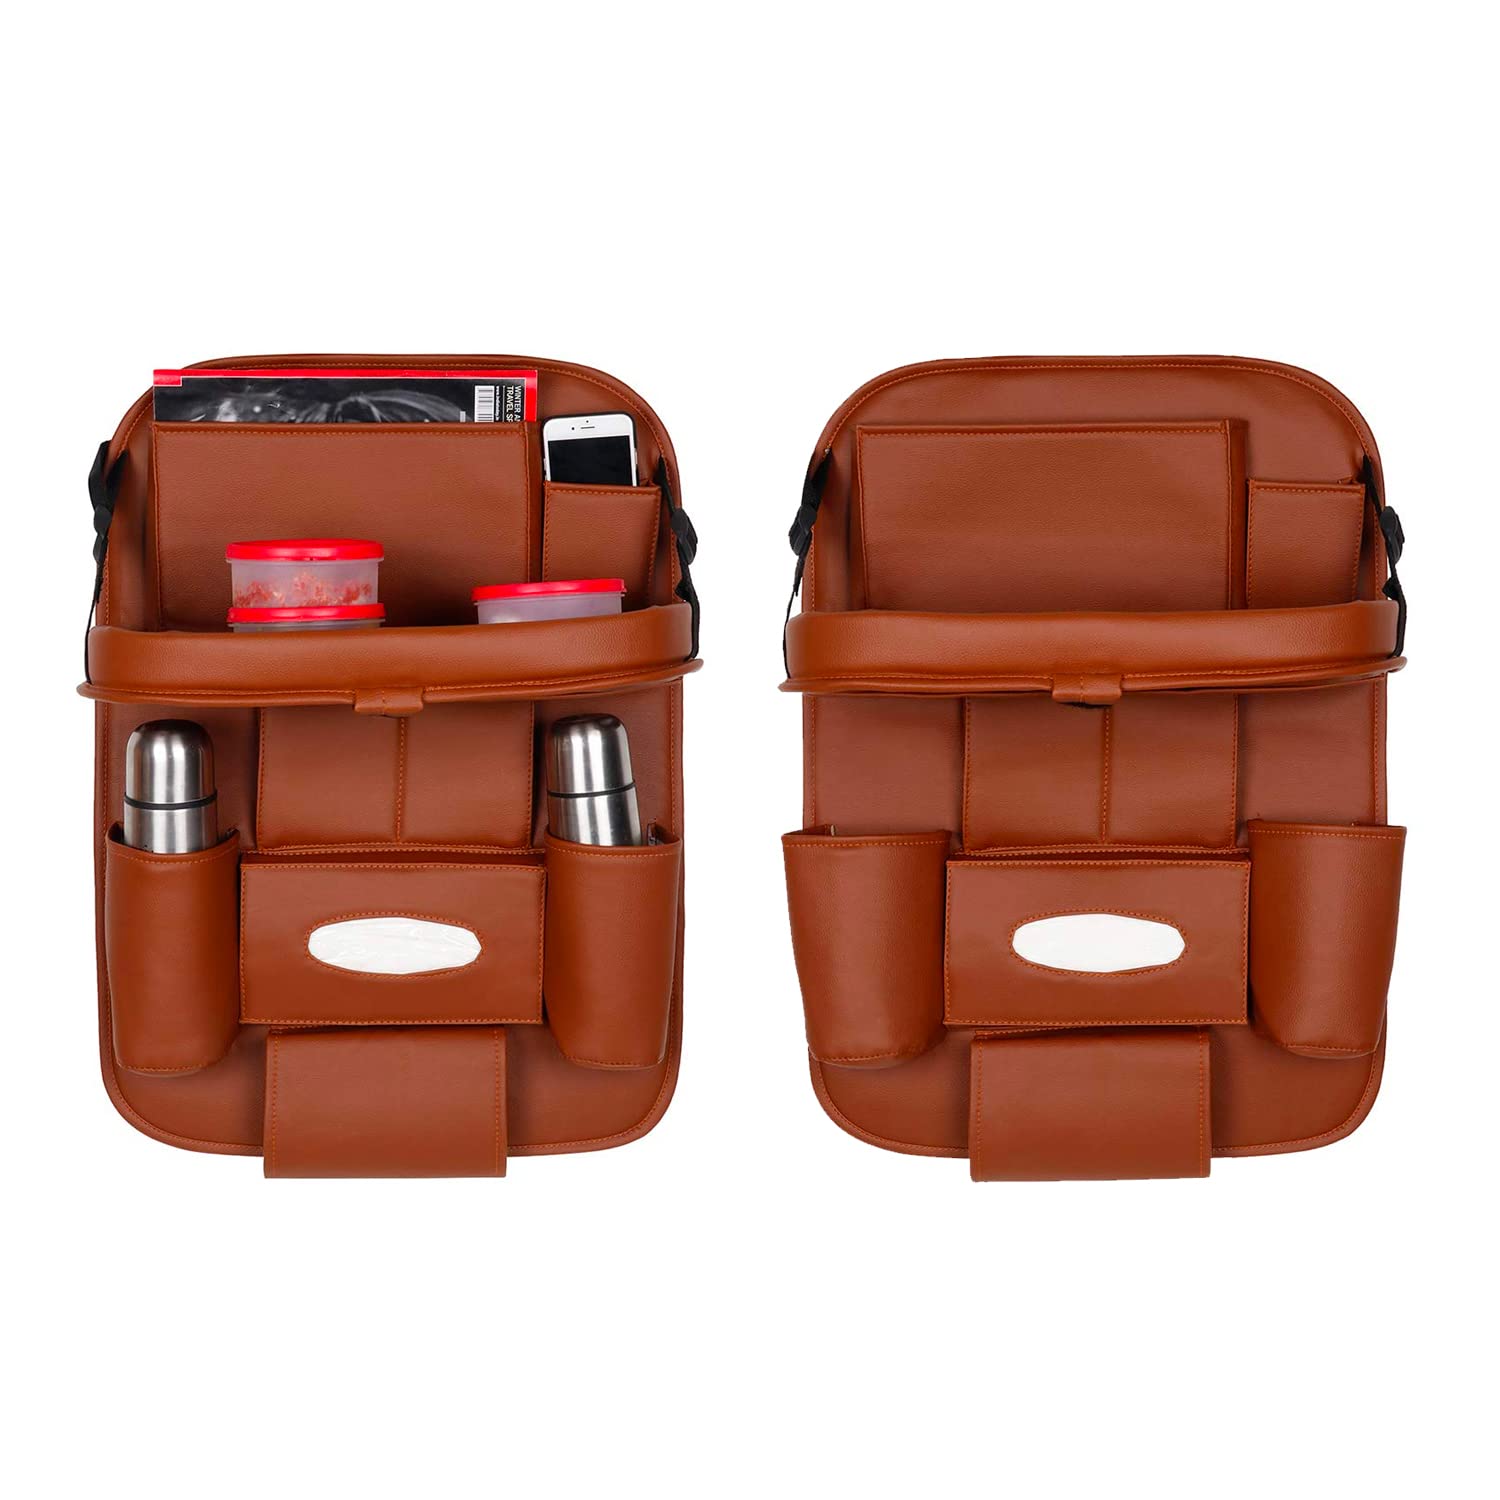 Buy 3D Backseat organizer - Coffee Online at Best Price in India